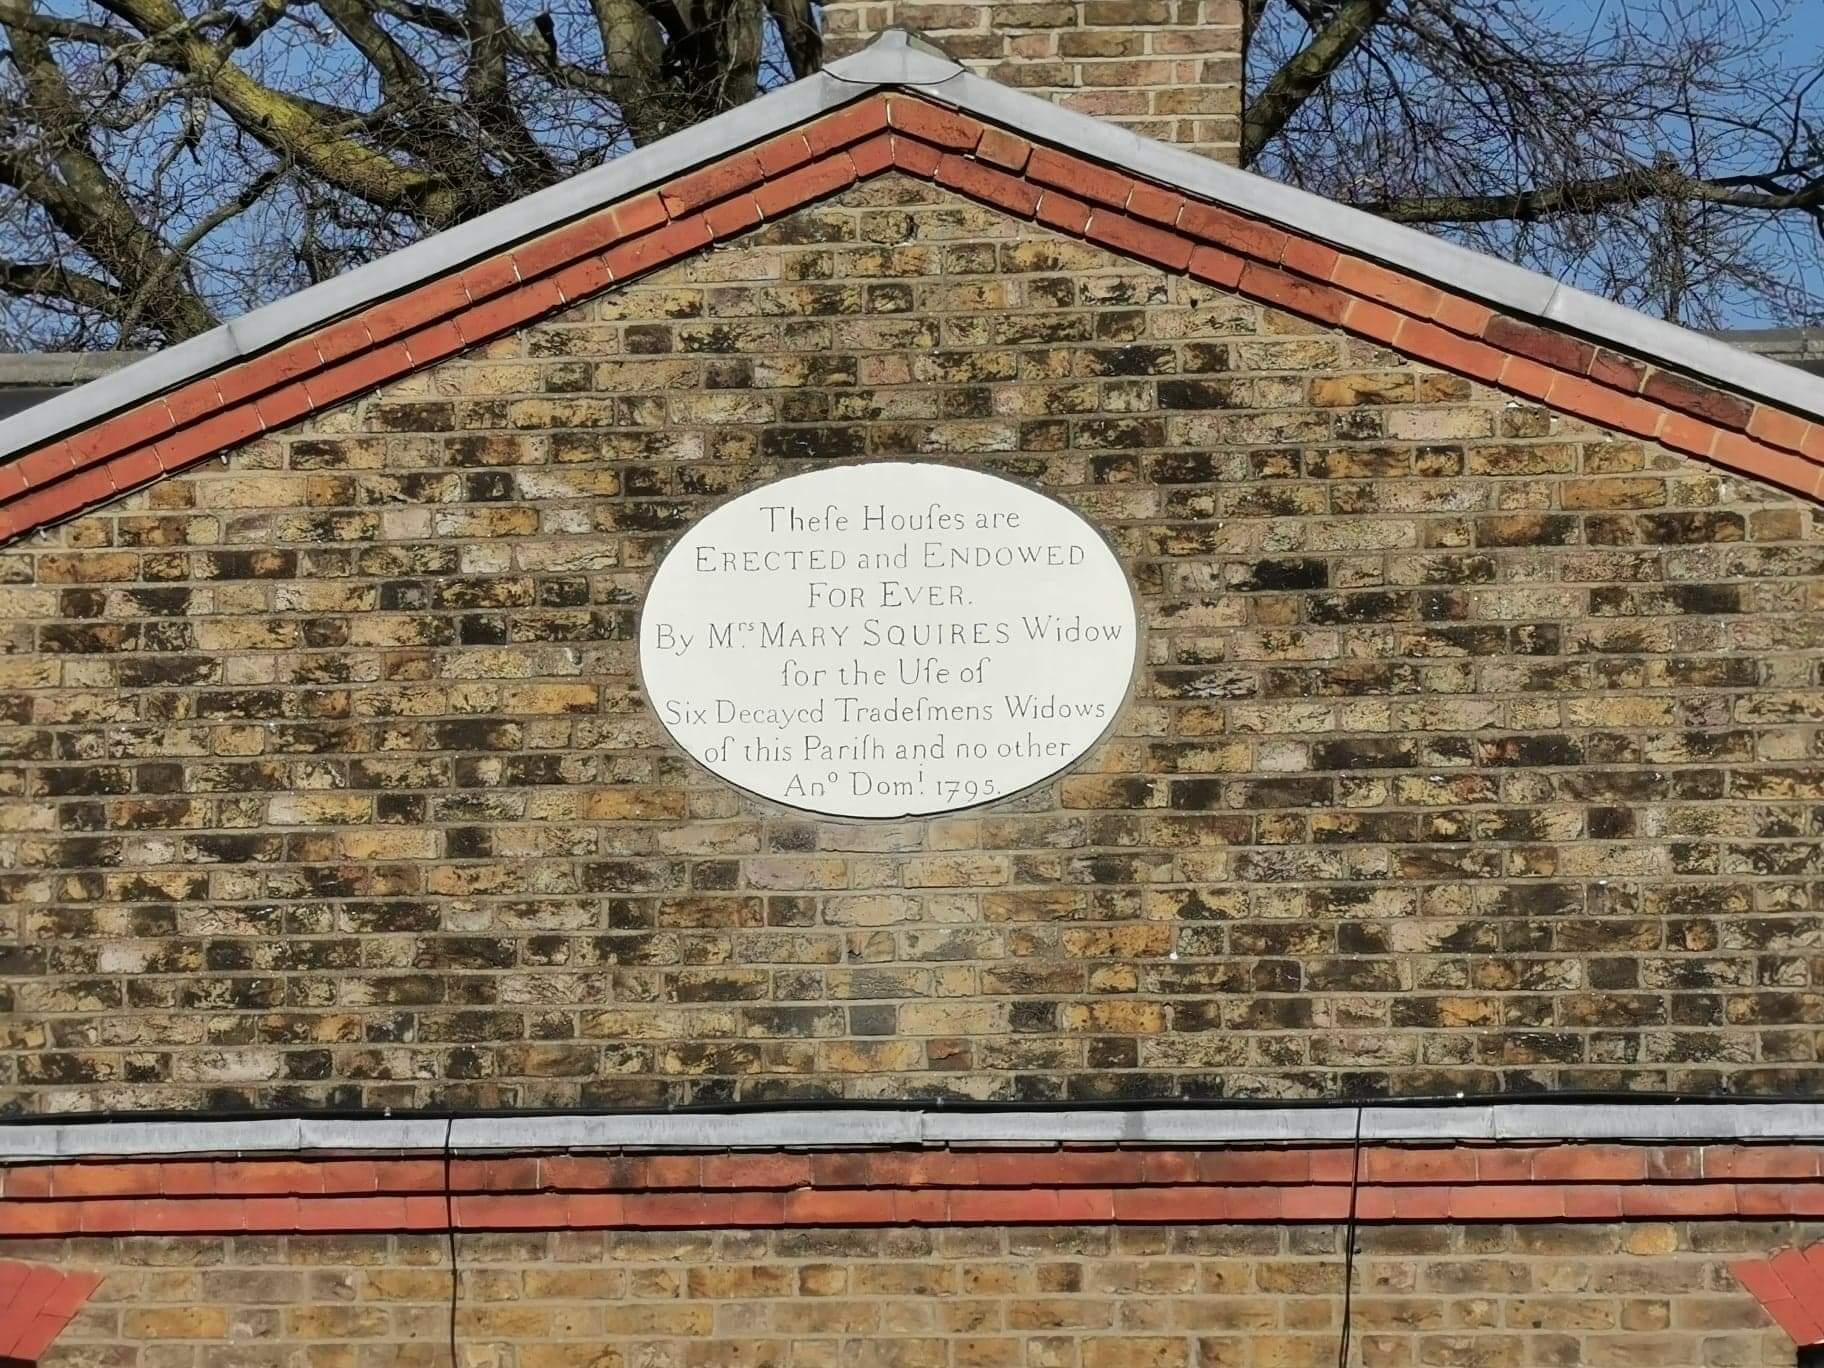 The plaque on the front of the almshouses